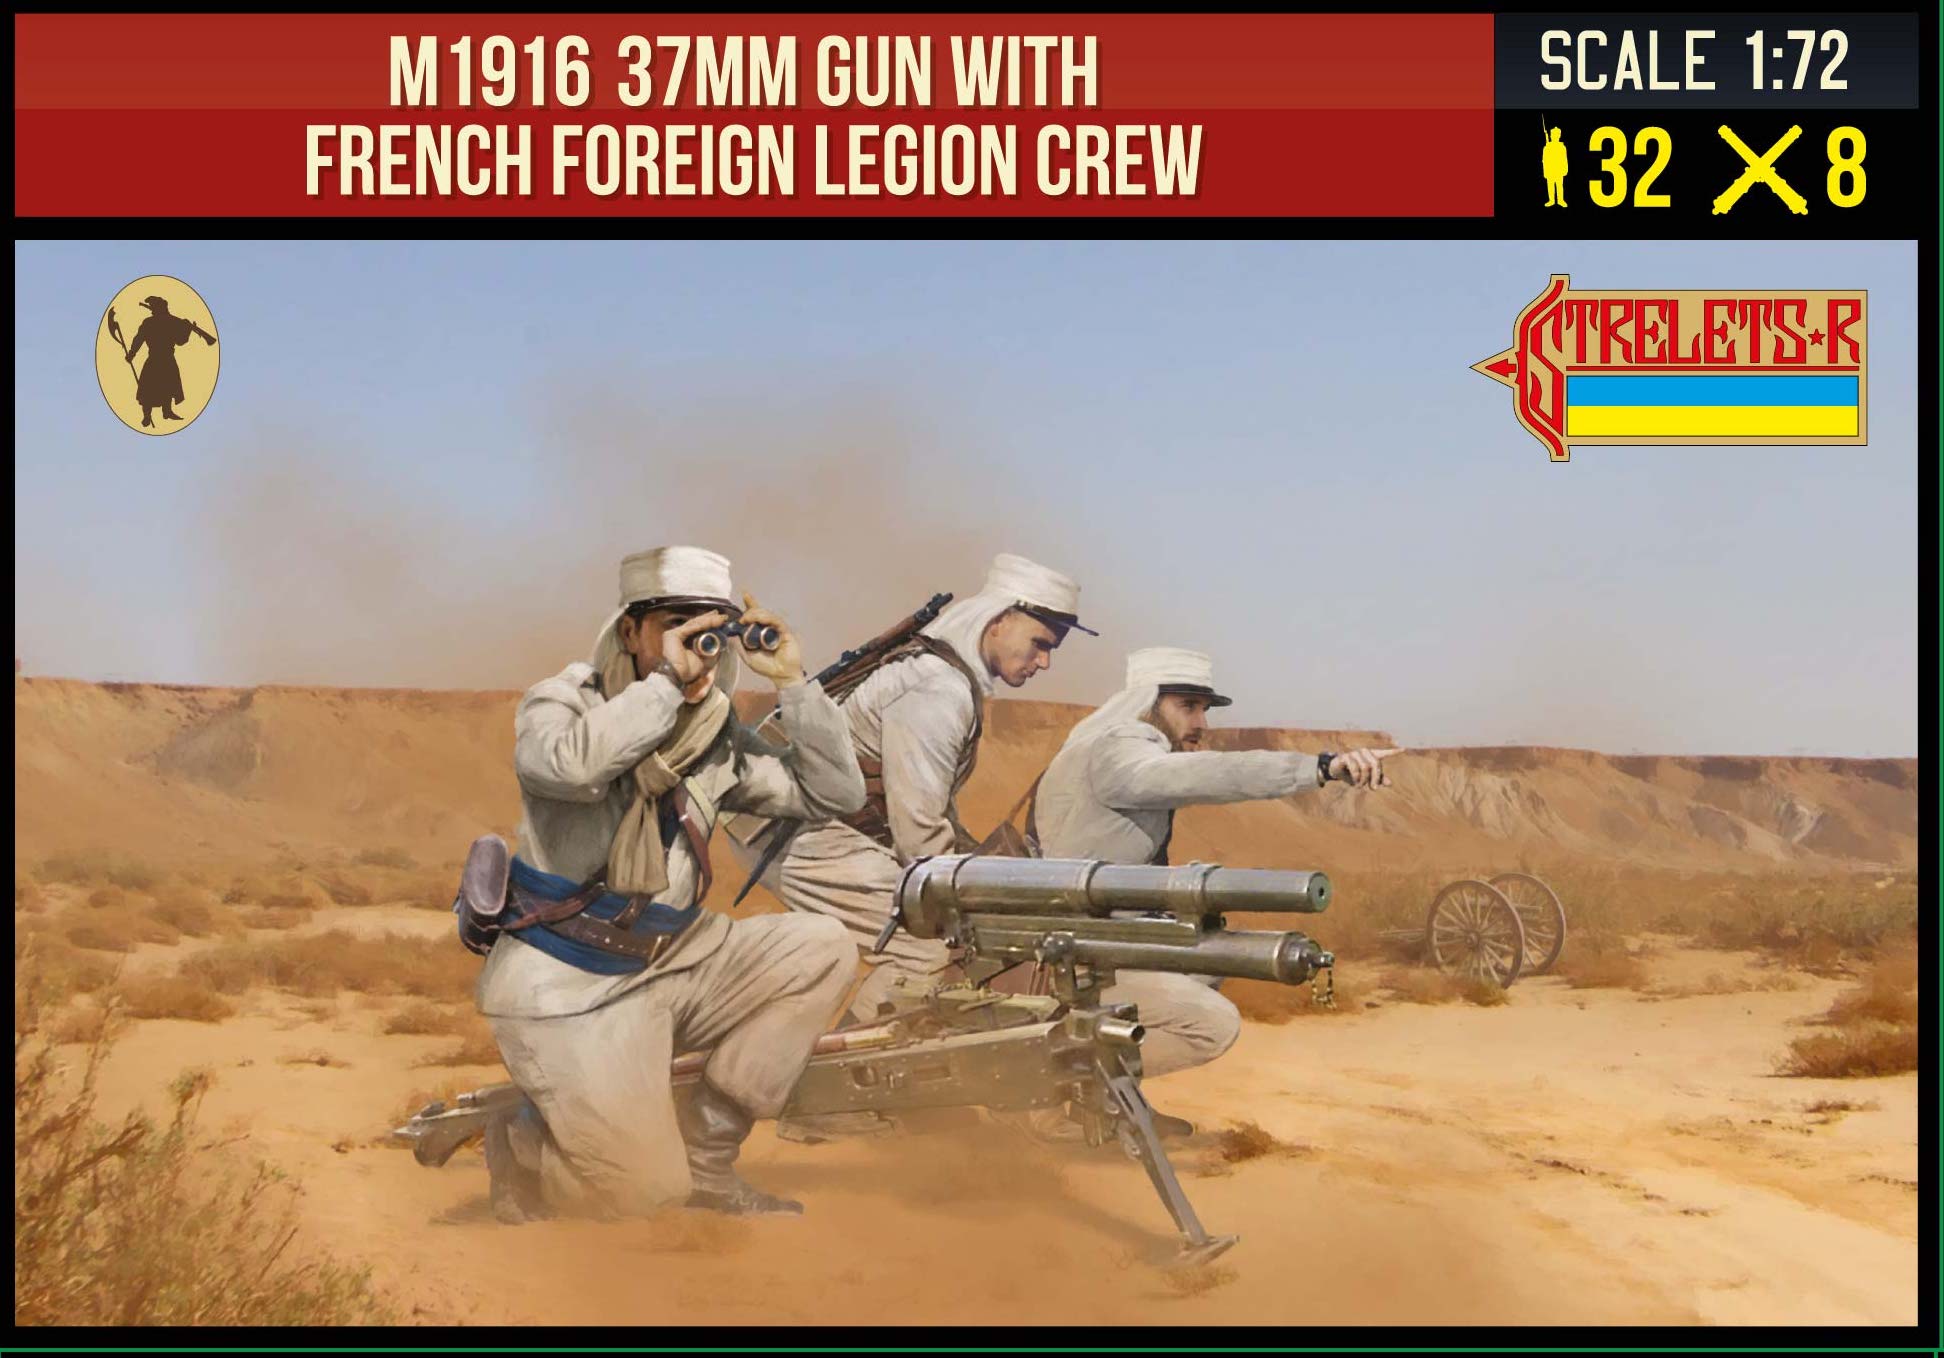 Rif War M1916 37mm with French Foreign Legion crew